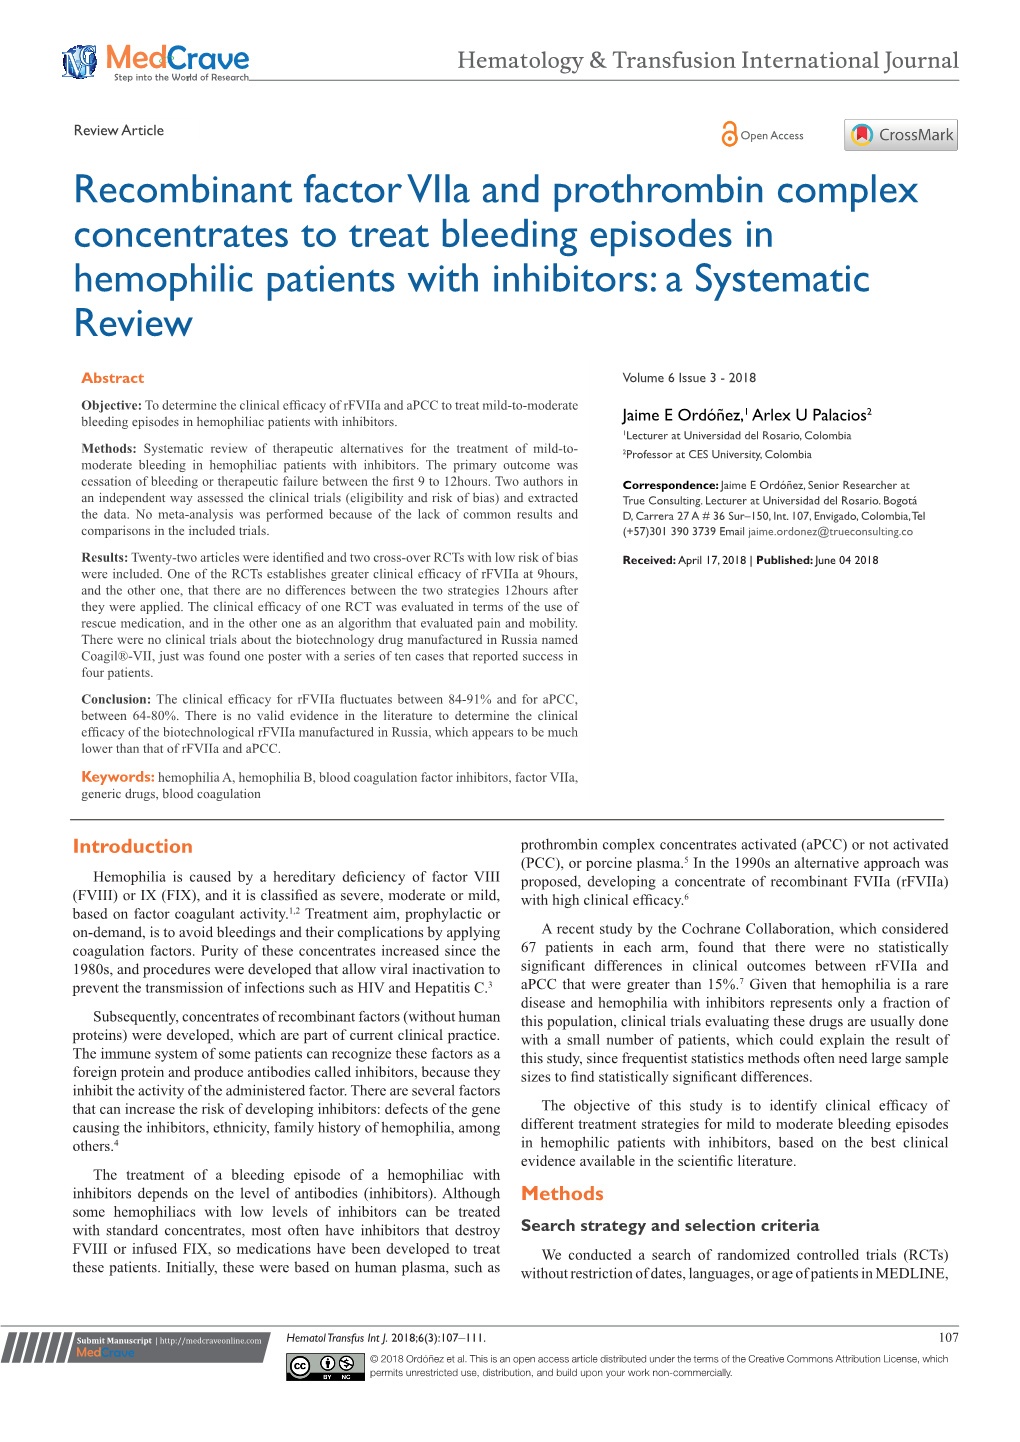 Recombinant Factor Viia and Prothrombin Complex Concentrates to Treat Bleeding Episodes in Hemophilic Patients with Inhibitors: a Systematic Review